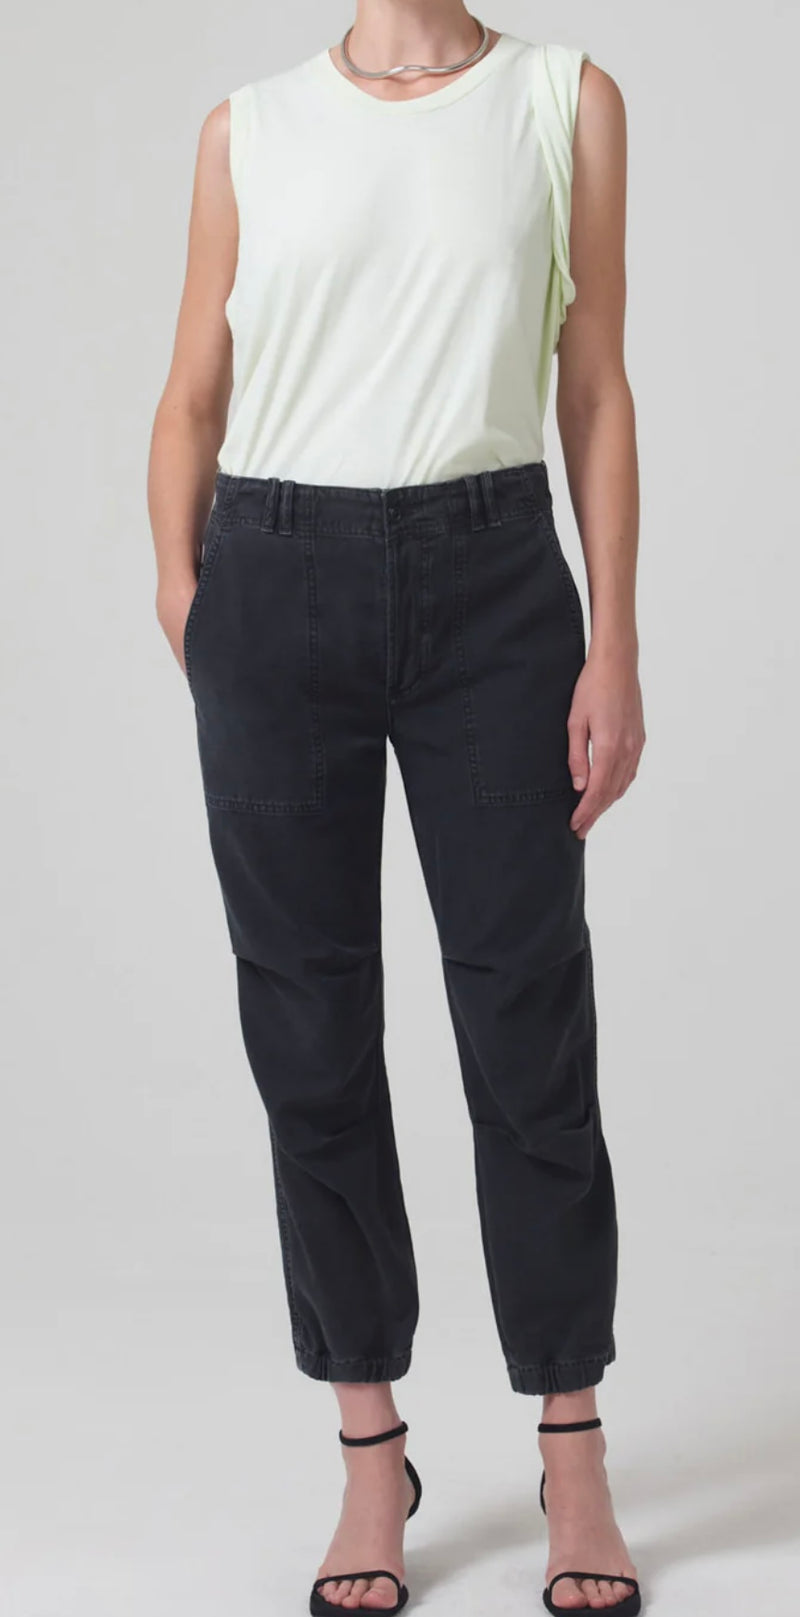 AGNI UTILITY TROUSER IN WASHED BLACK